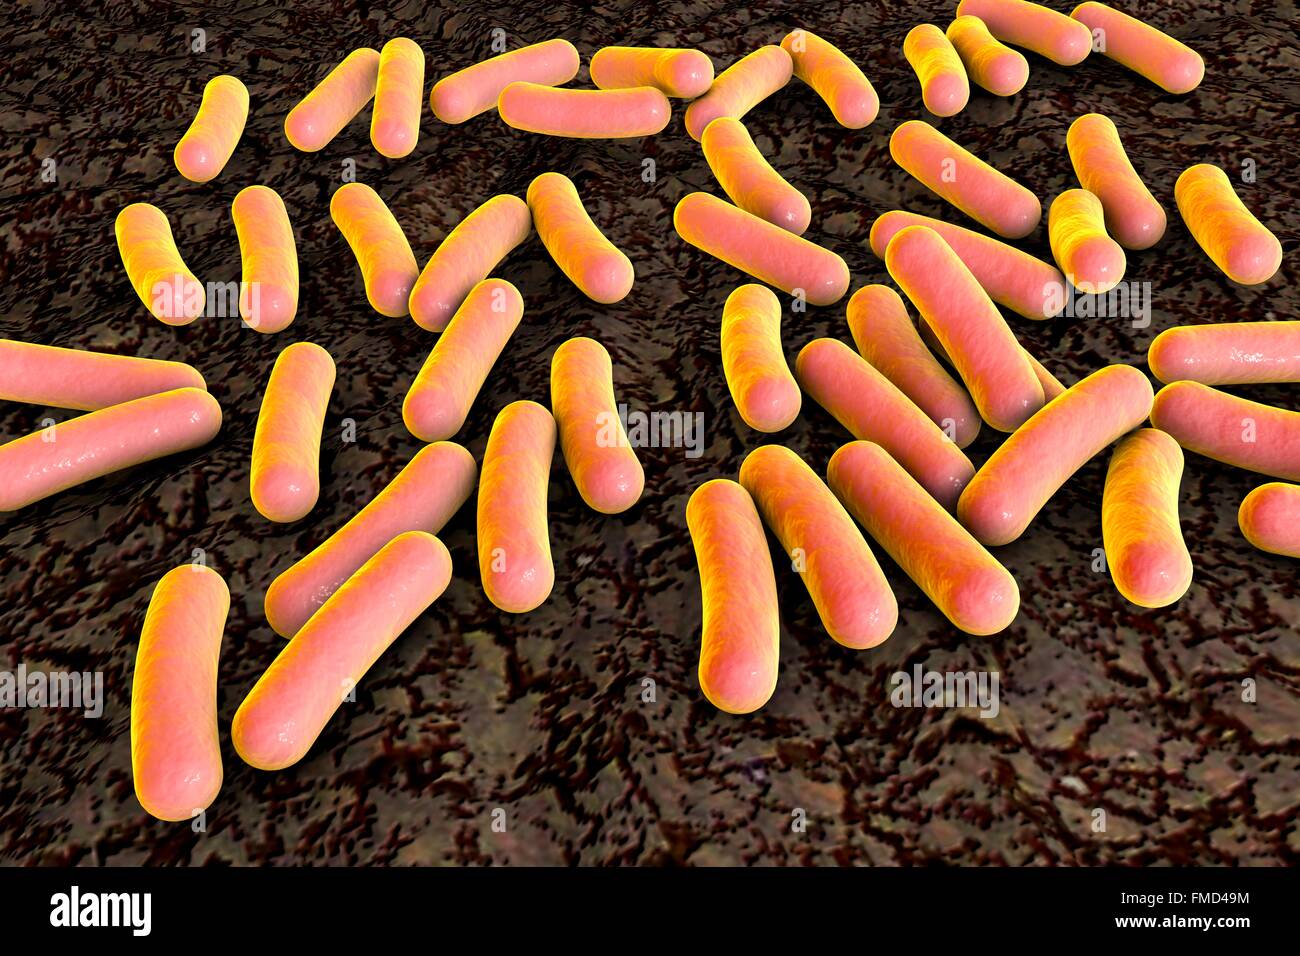 Pseudomonas aeruginosa bacteria, computer illustration. P. aeruginosa is a gram-negative bacterium which causes multiple antibiotic resistant nosocomial (hospital-acquired) infections of different location, including pneumonia, osteomyelitis, peritonitis and wound infections. Stock Photo